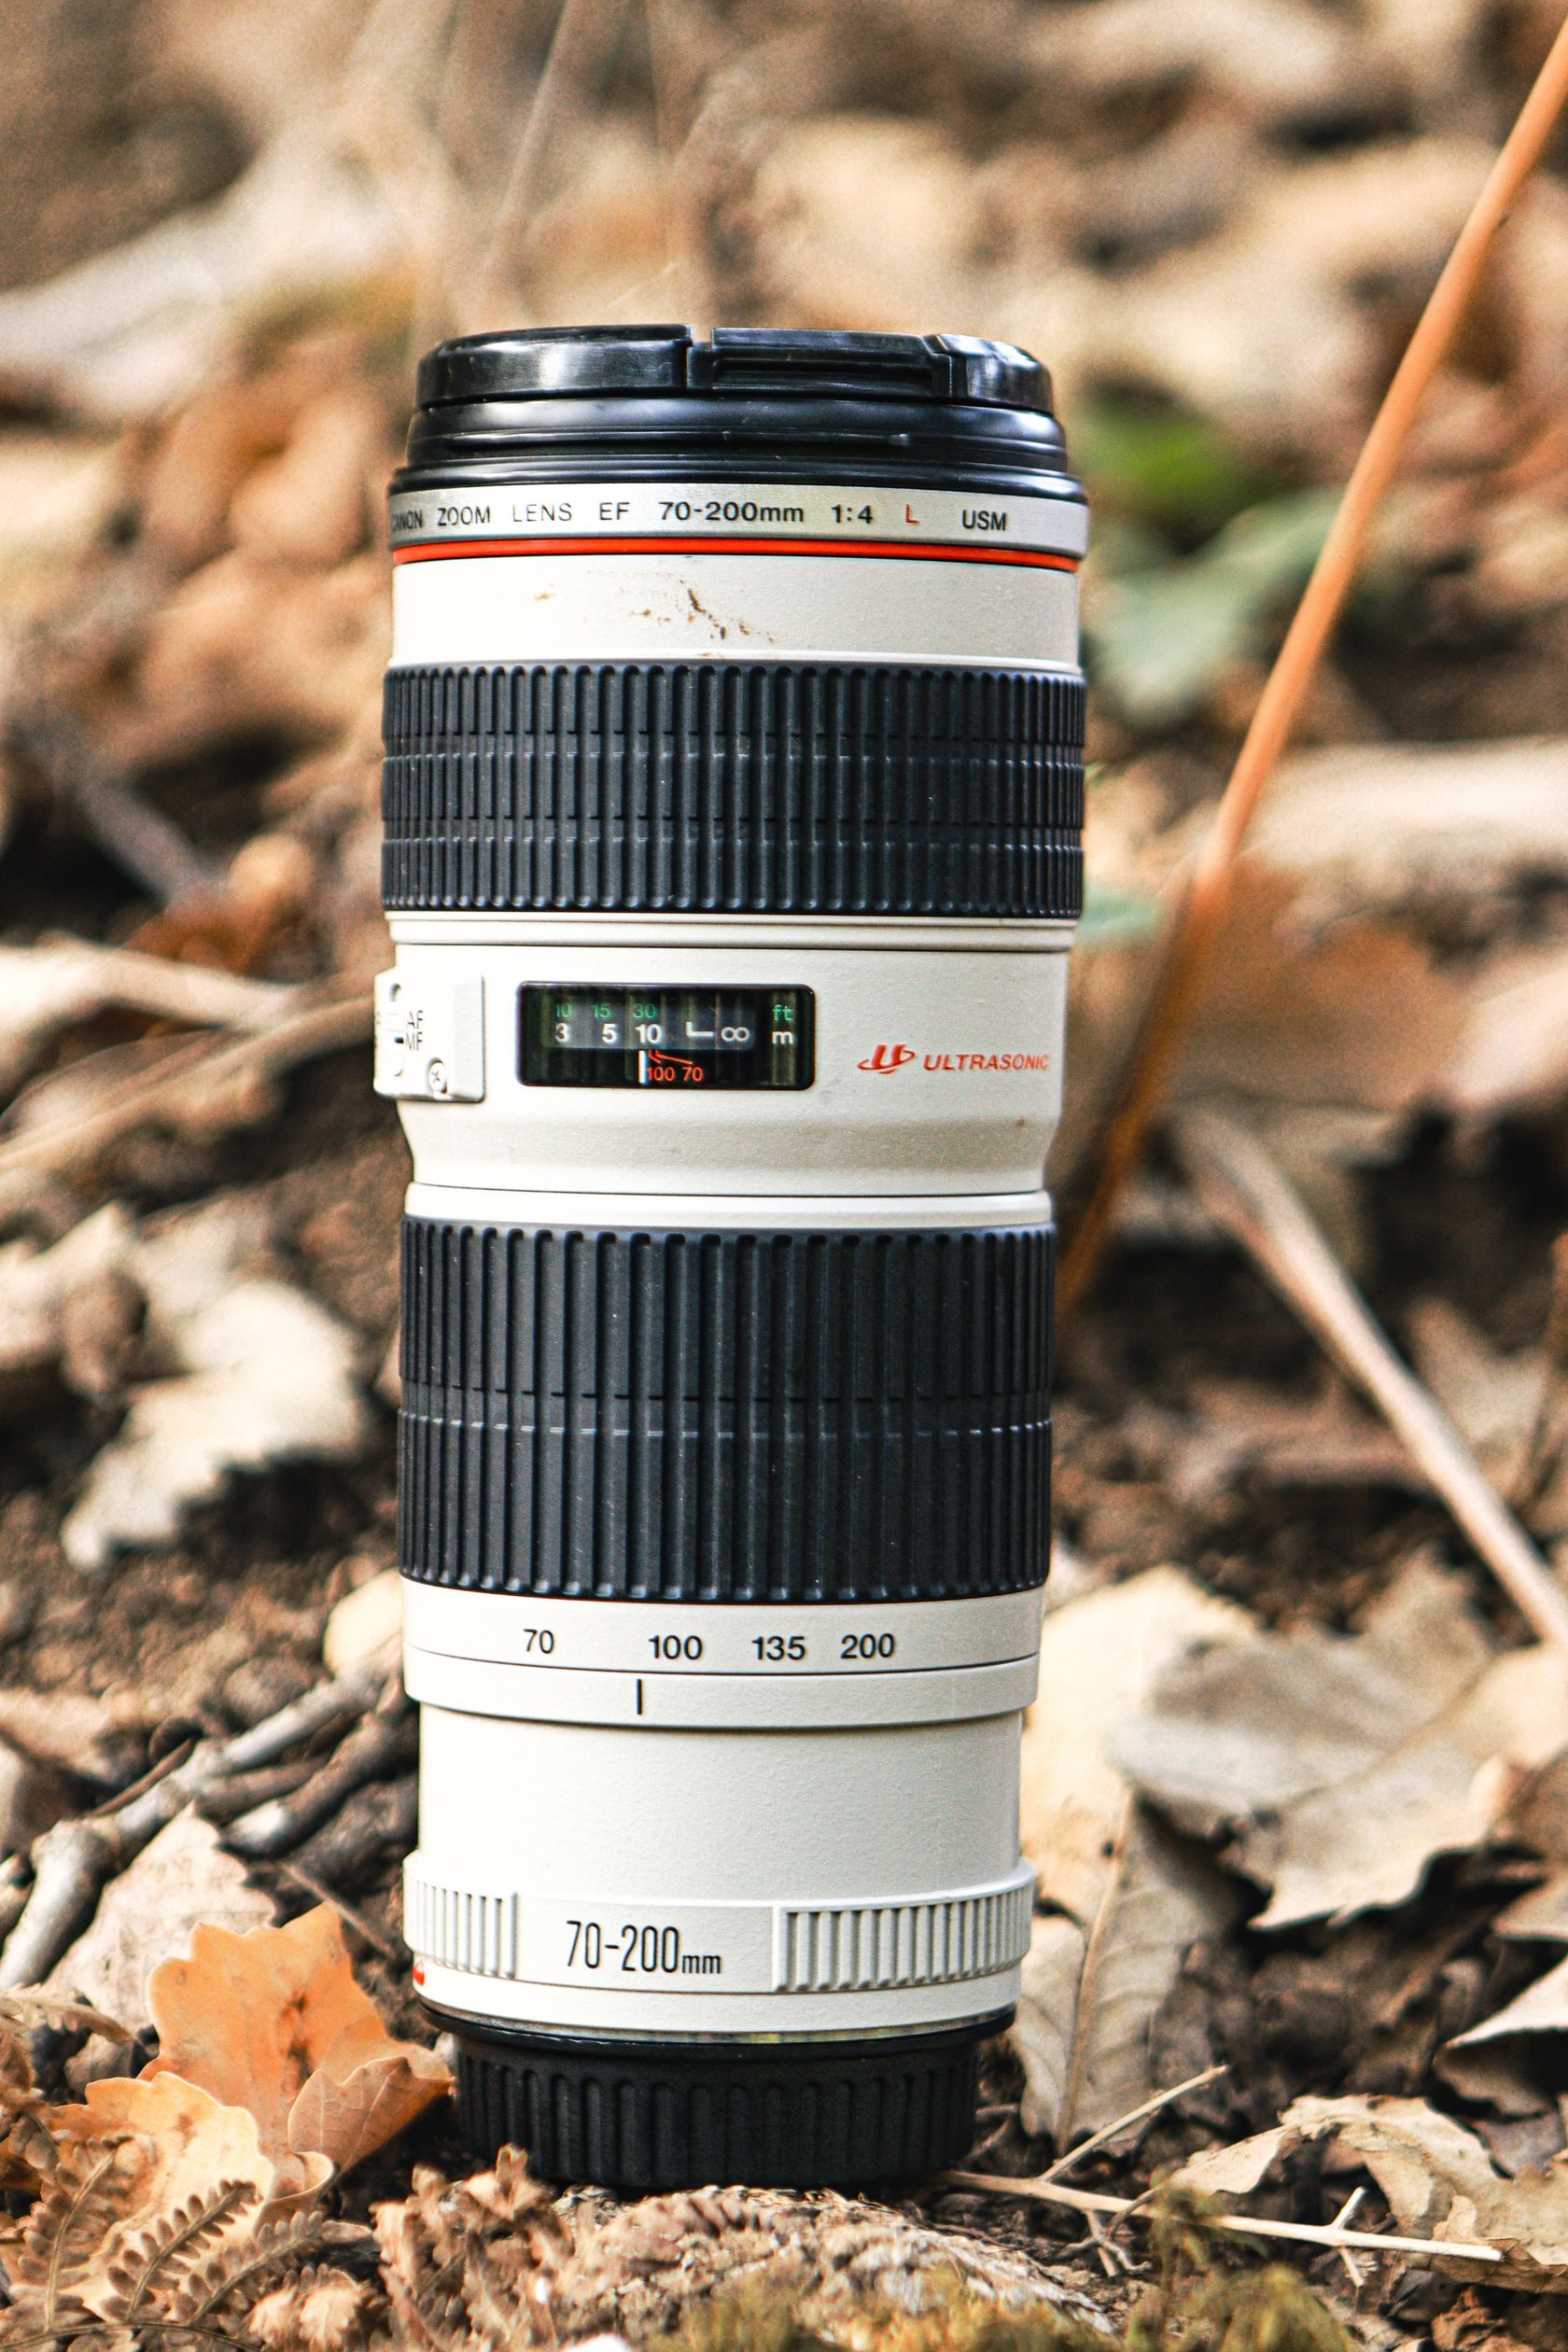 Introducing the Canon RF 50mm F1.8 & 70-200mm F4 lenses